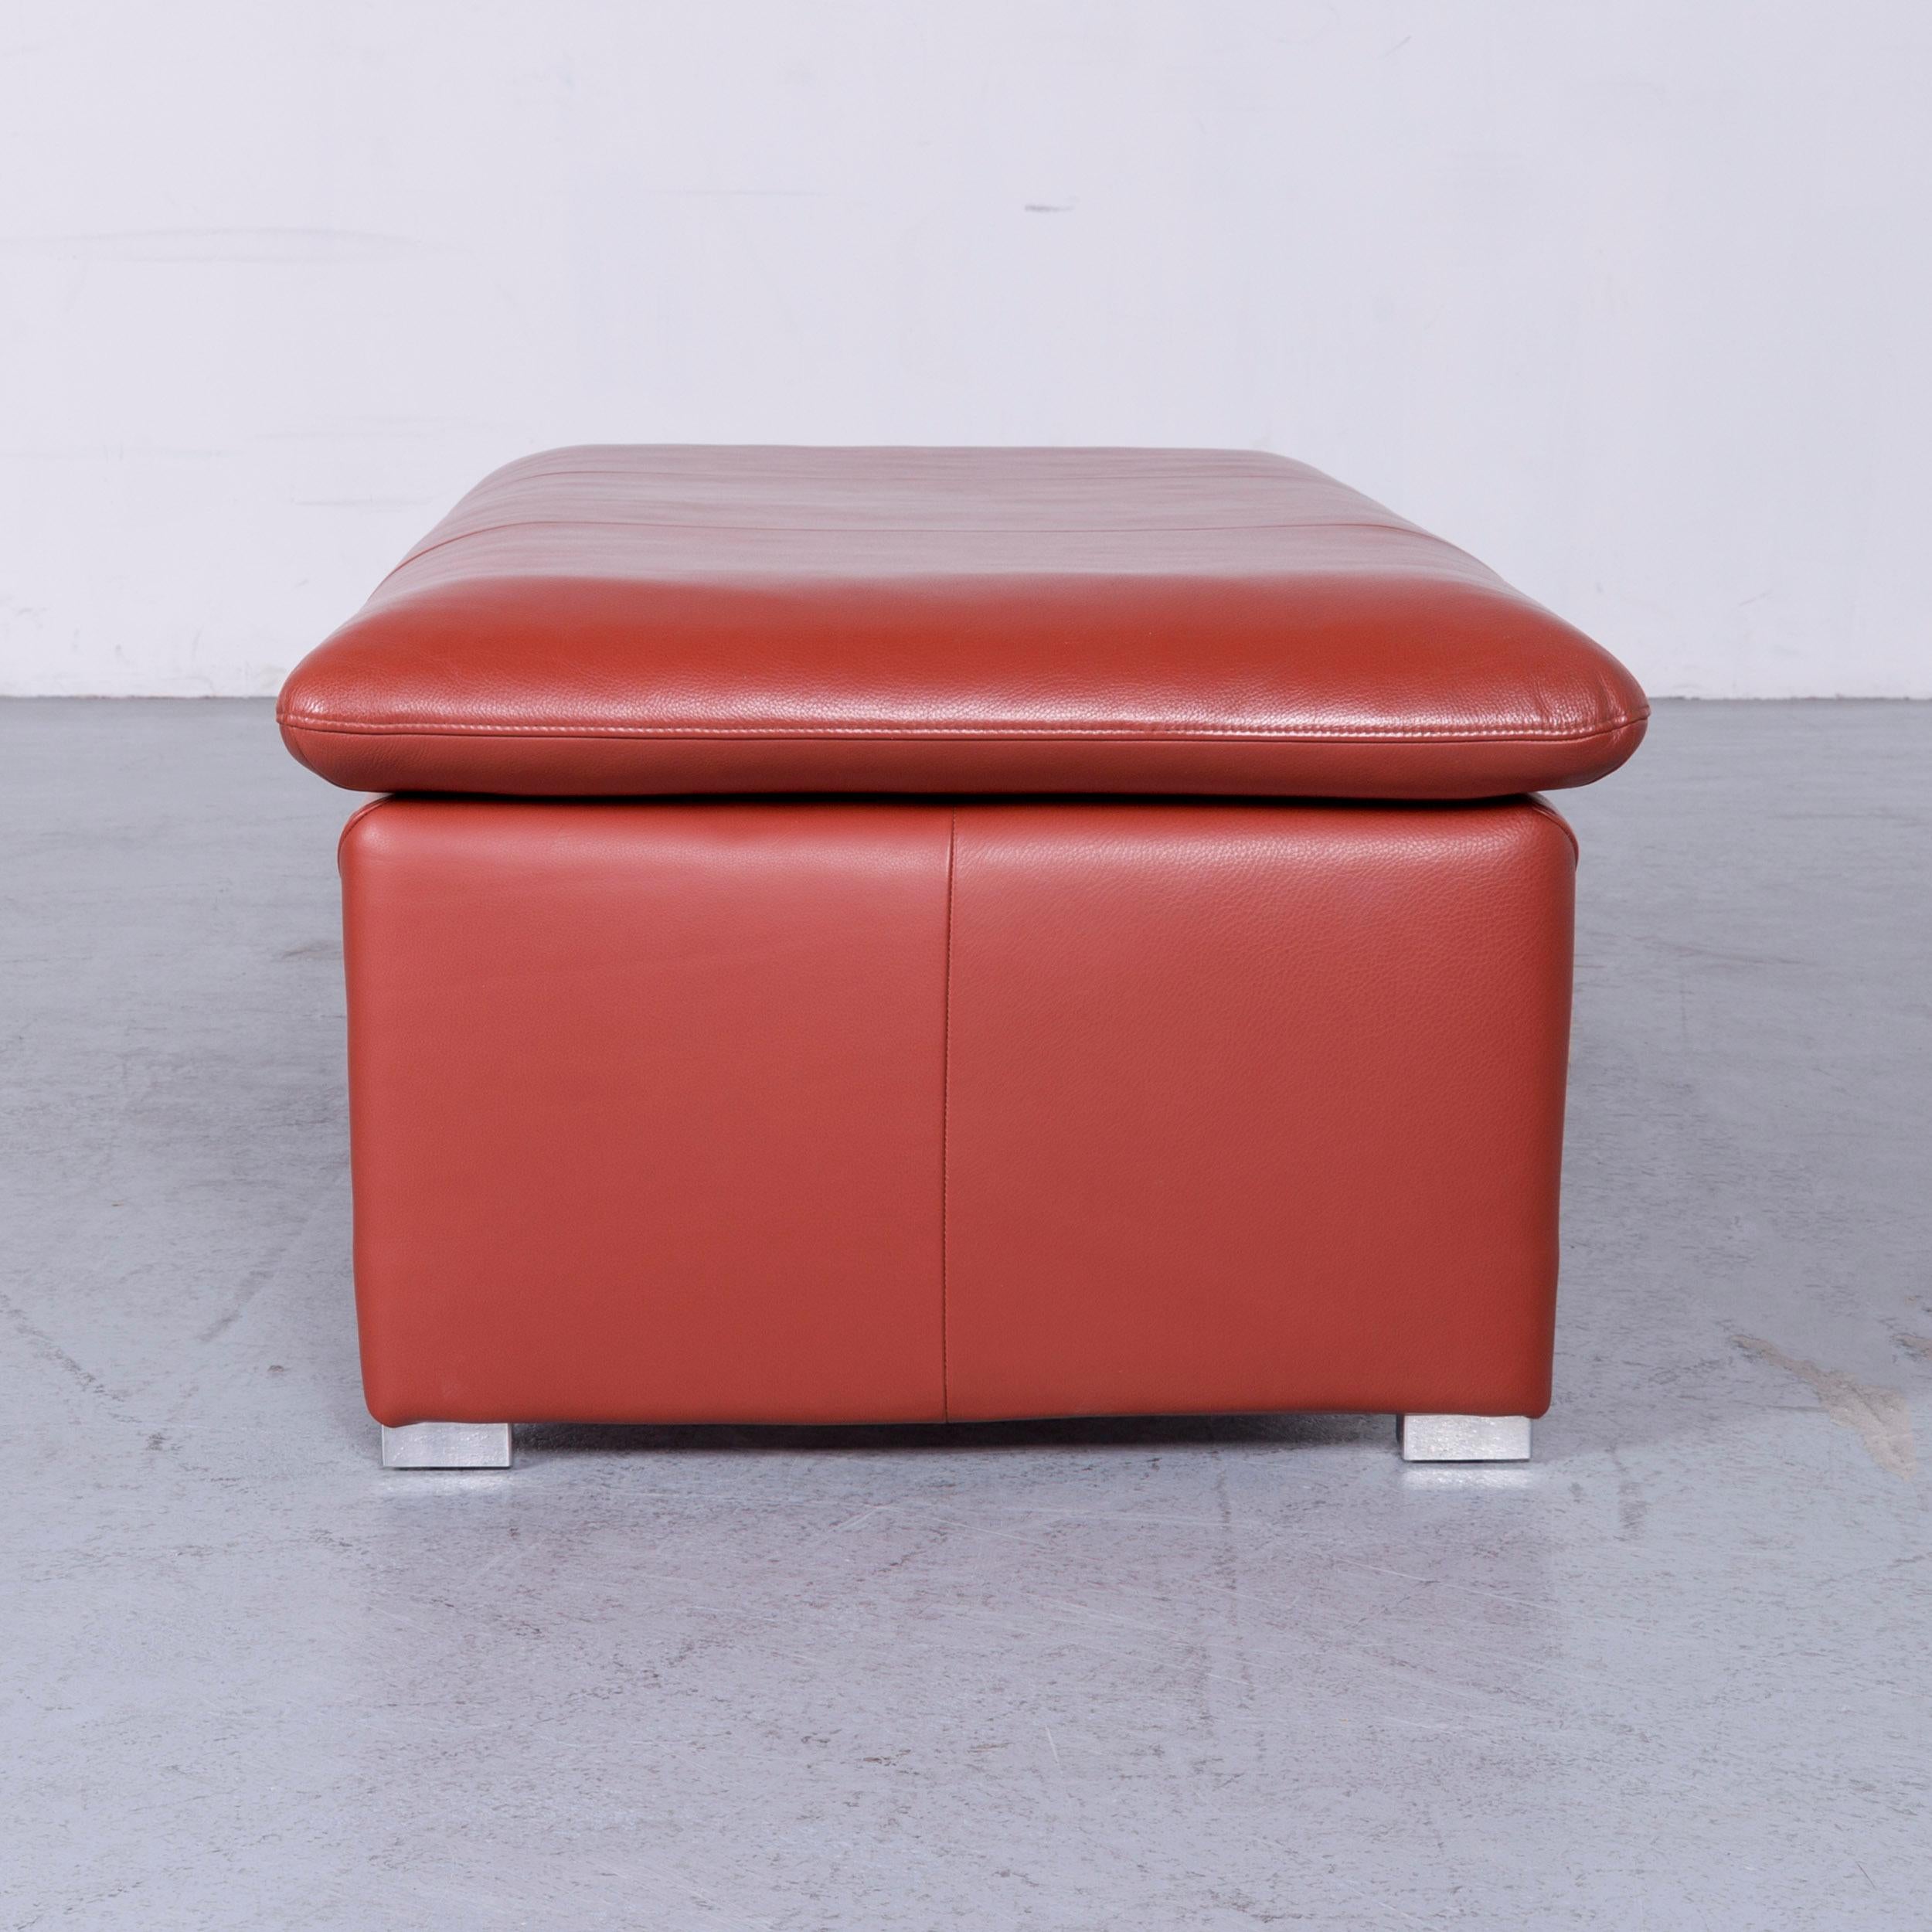 Contemporary Laauser Corvus Designer Footstool Leather Red One Seat Couch Modern